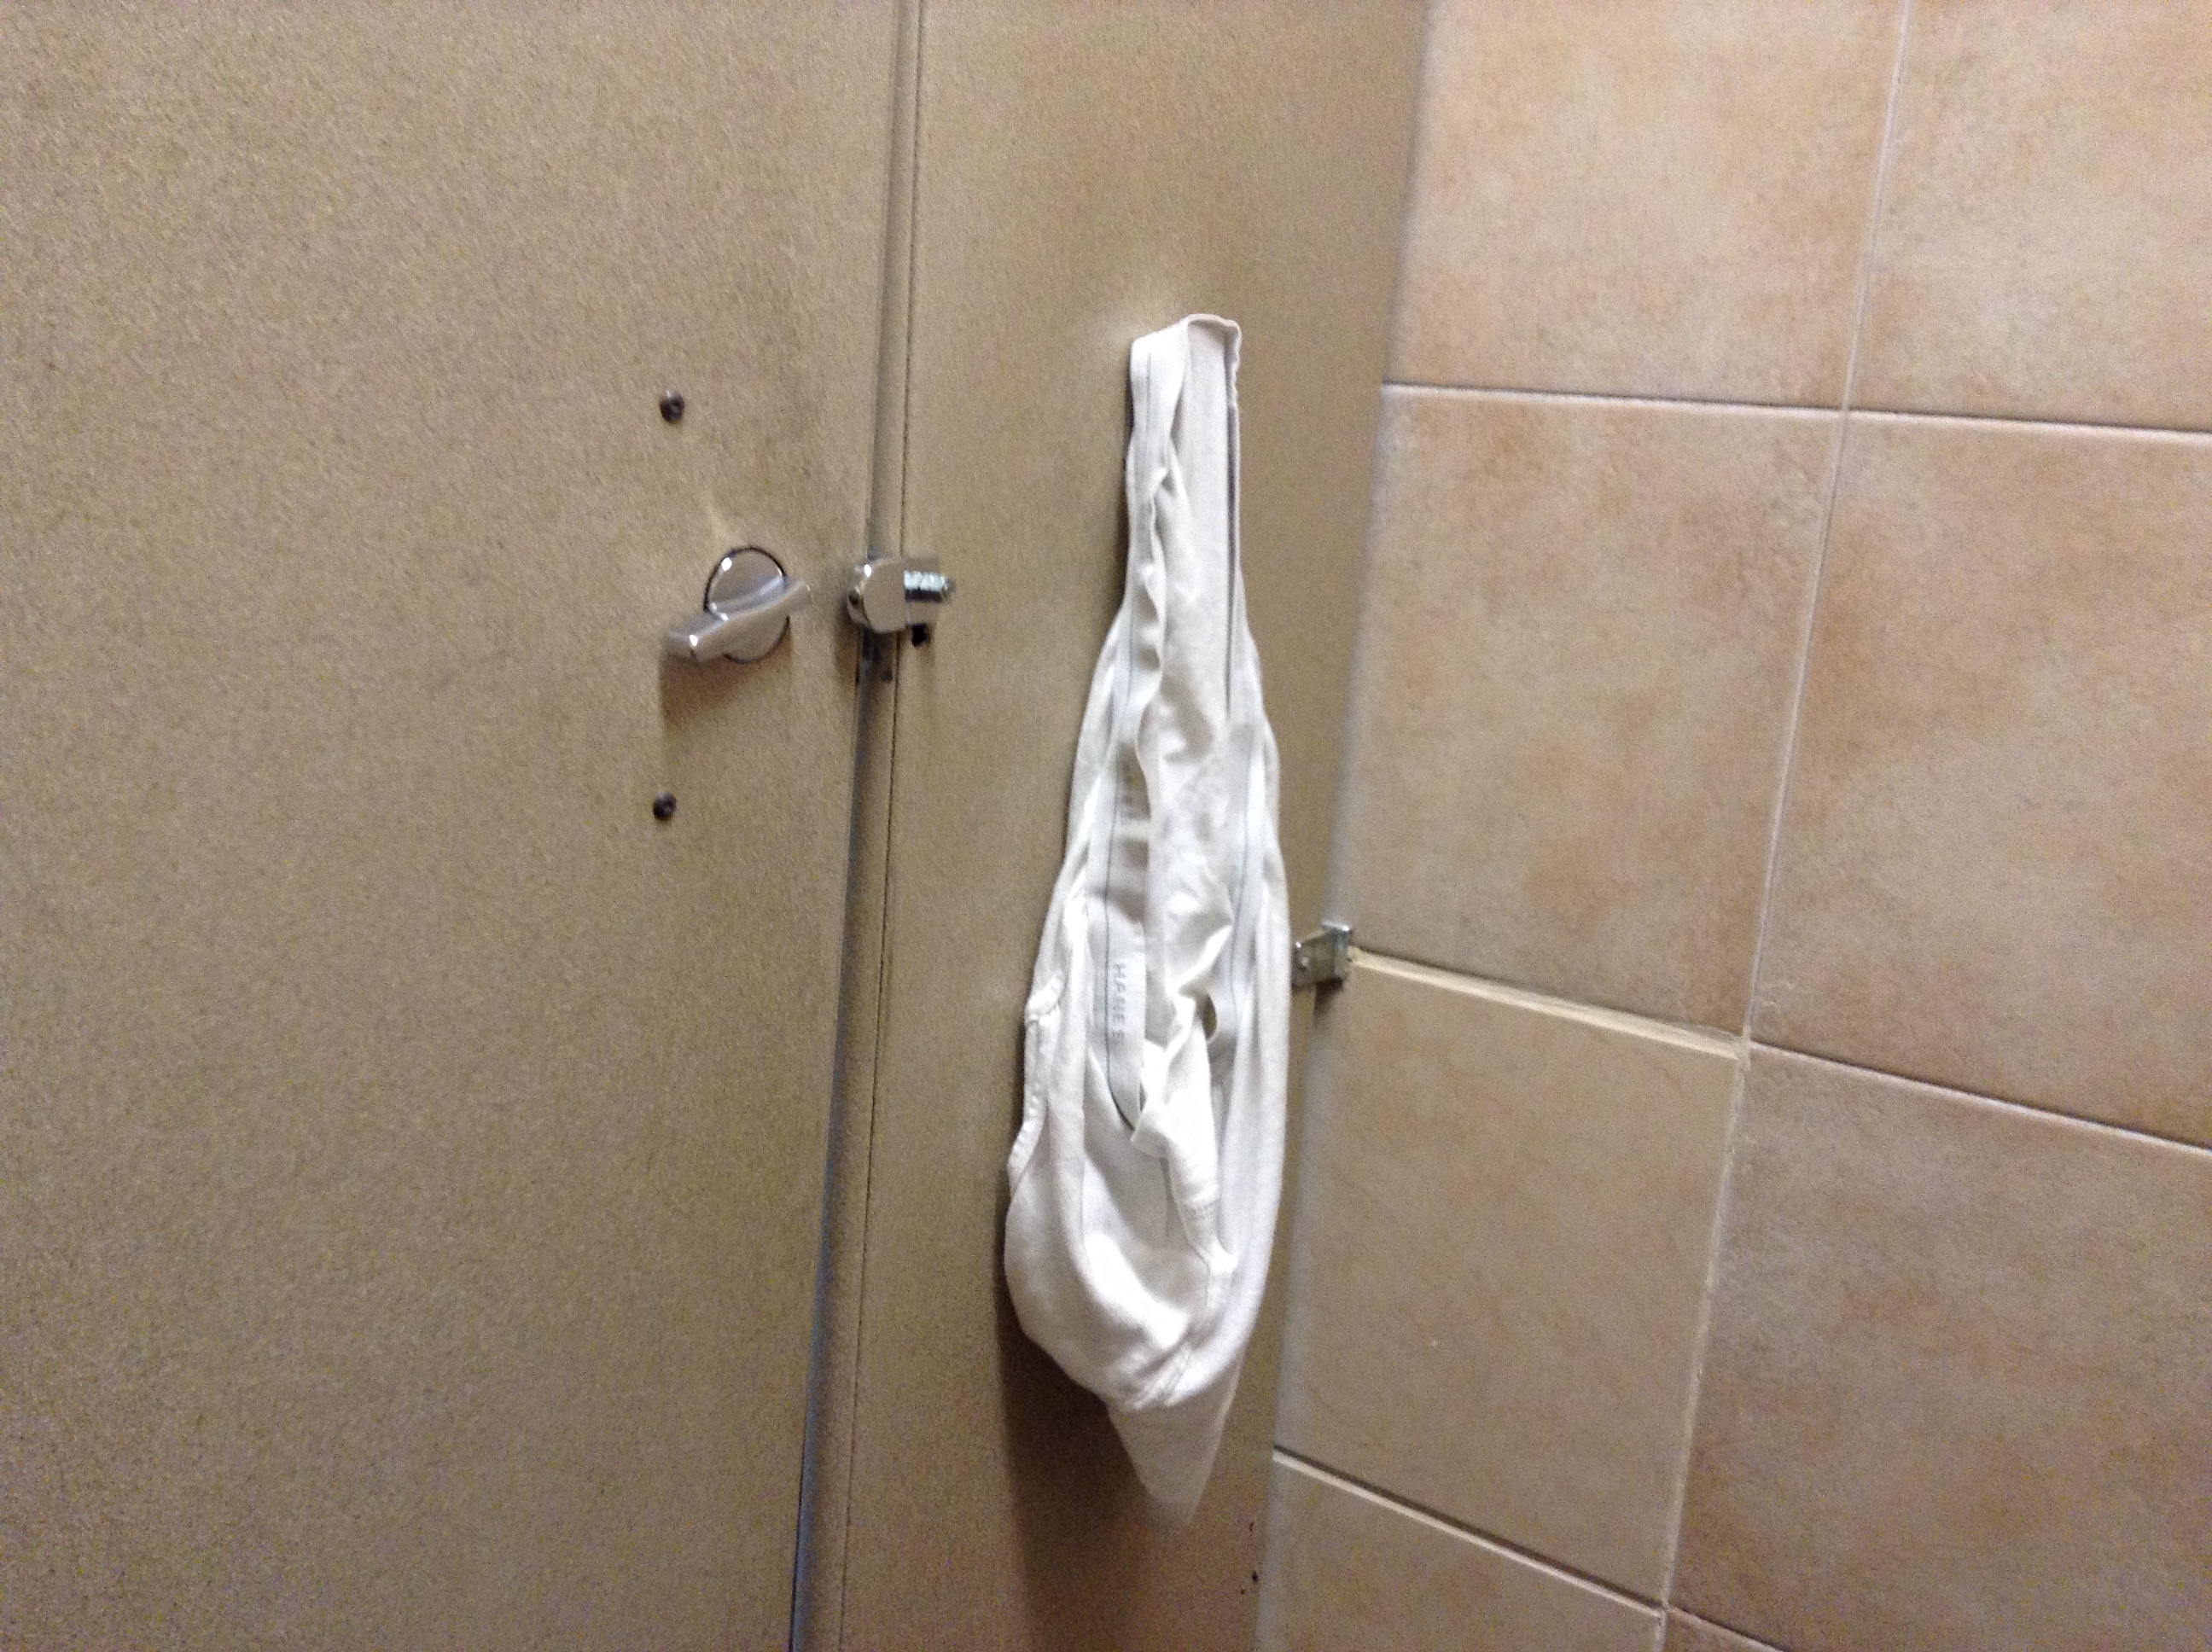 dirty undewear hanging on the back of a washroom stall door